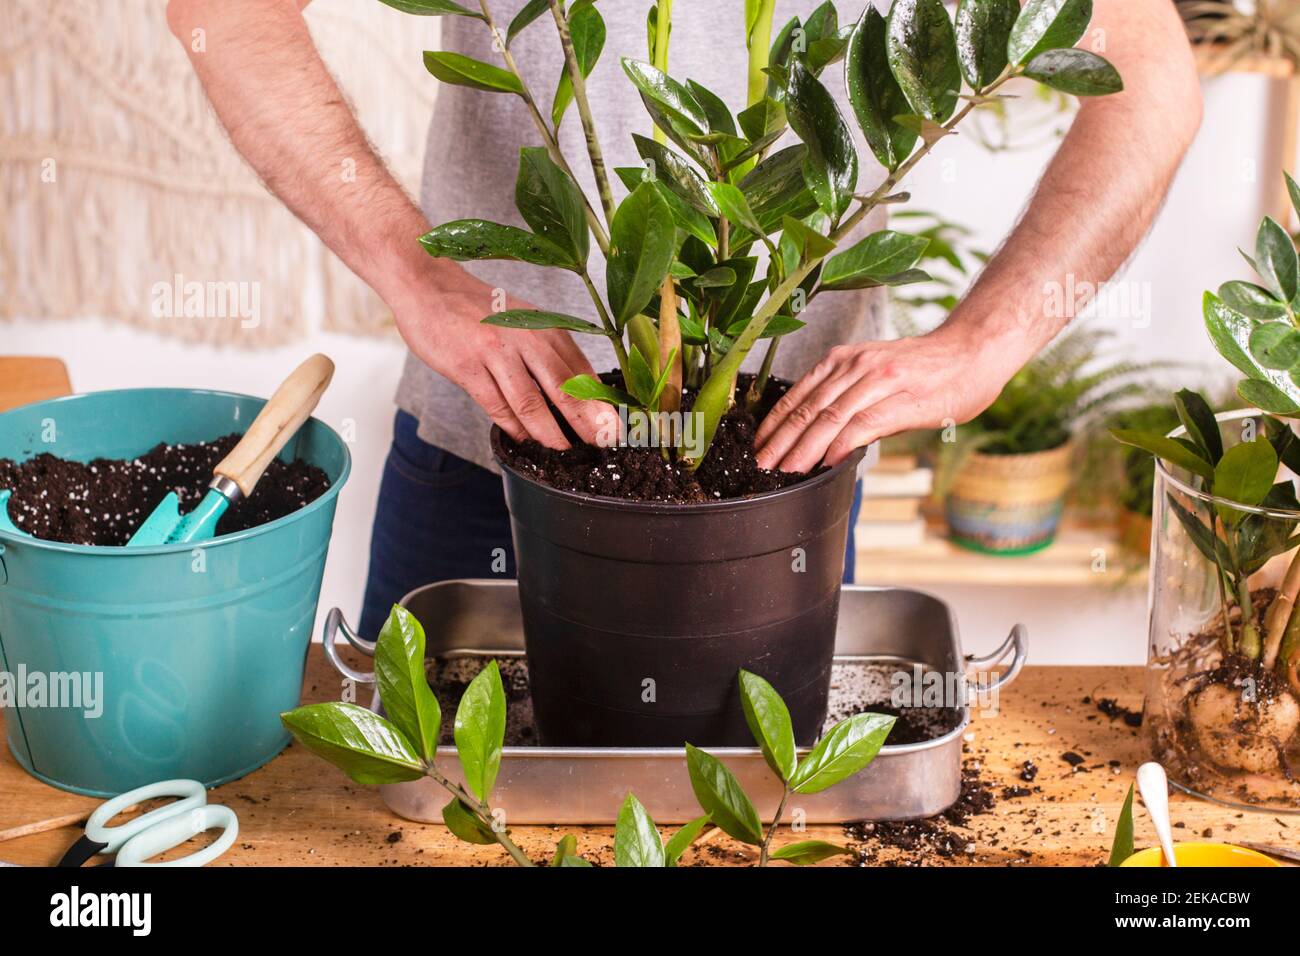 Man putting mud in Zamioculcas Zamiifolia flower pot while gardening at home Stock Photo